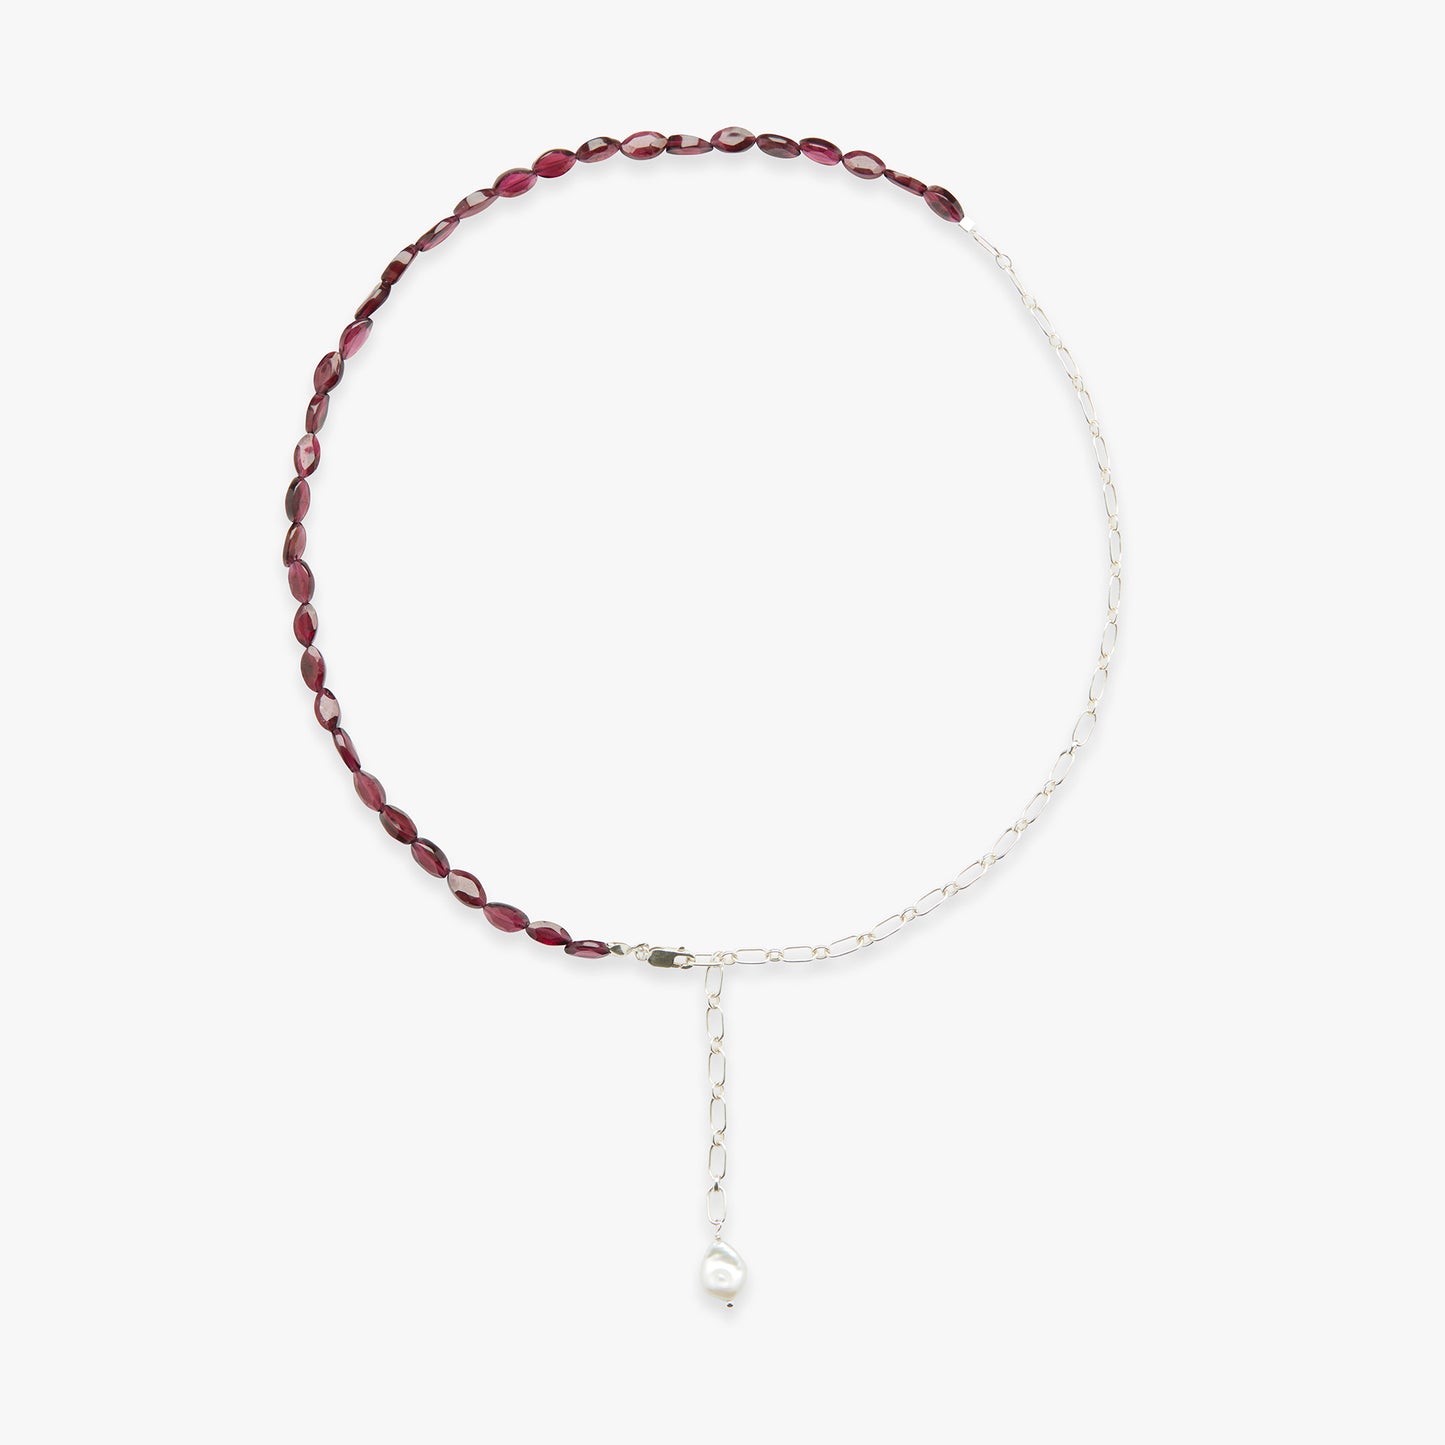 Pomegranate Seeds lariat ketting zilver